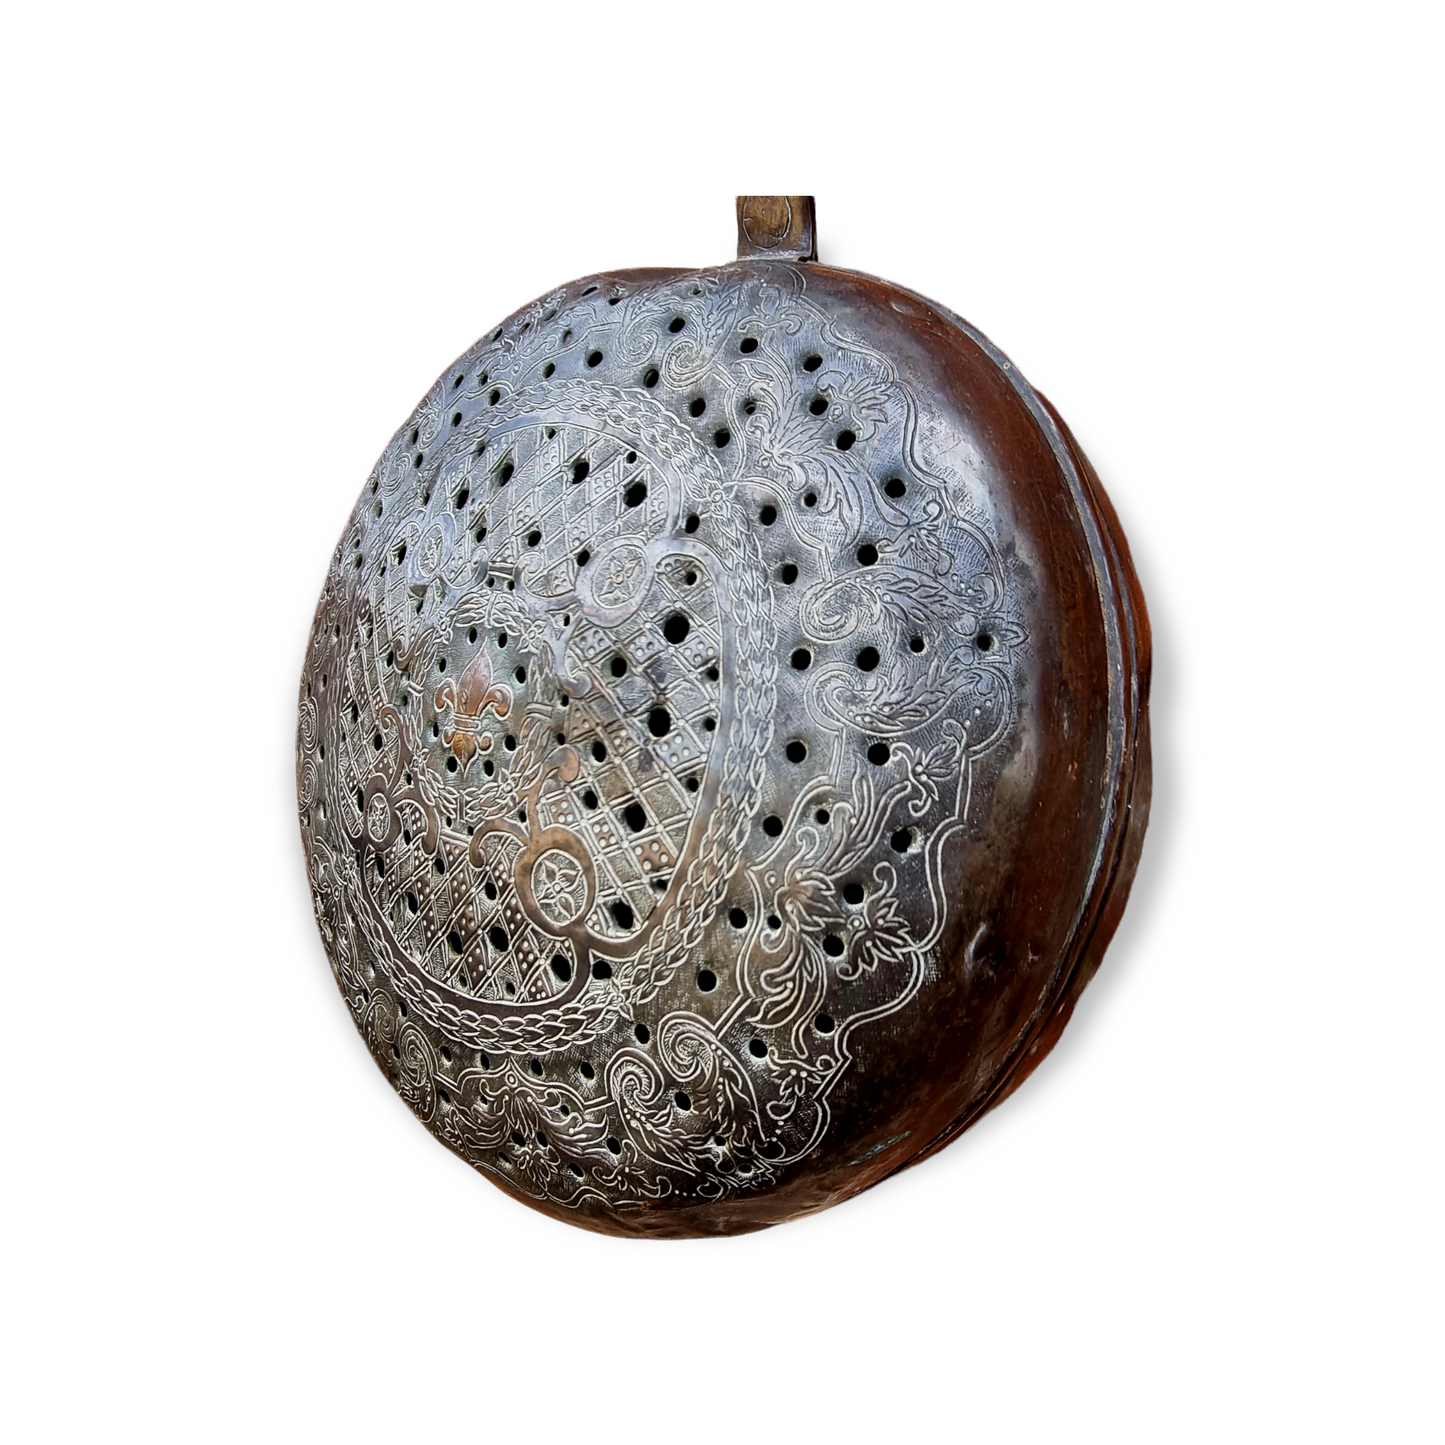 A Highly Desirable 17th Century French Antique Warming Pan